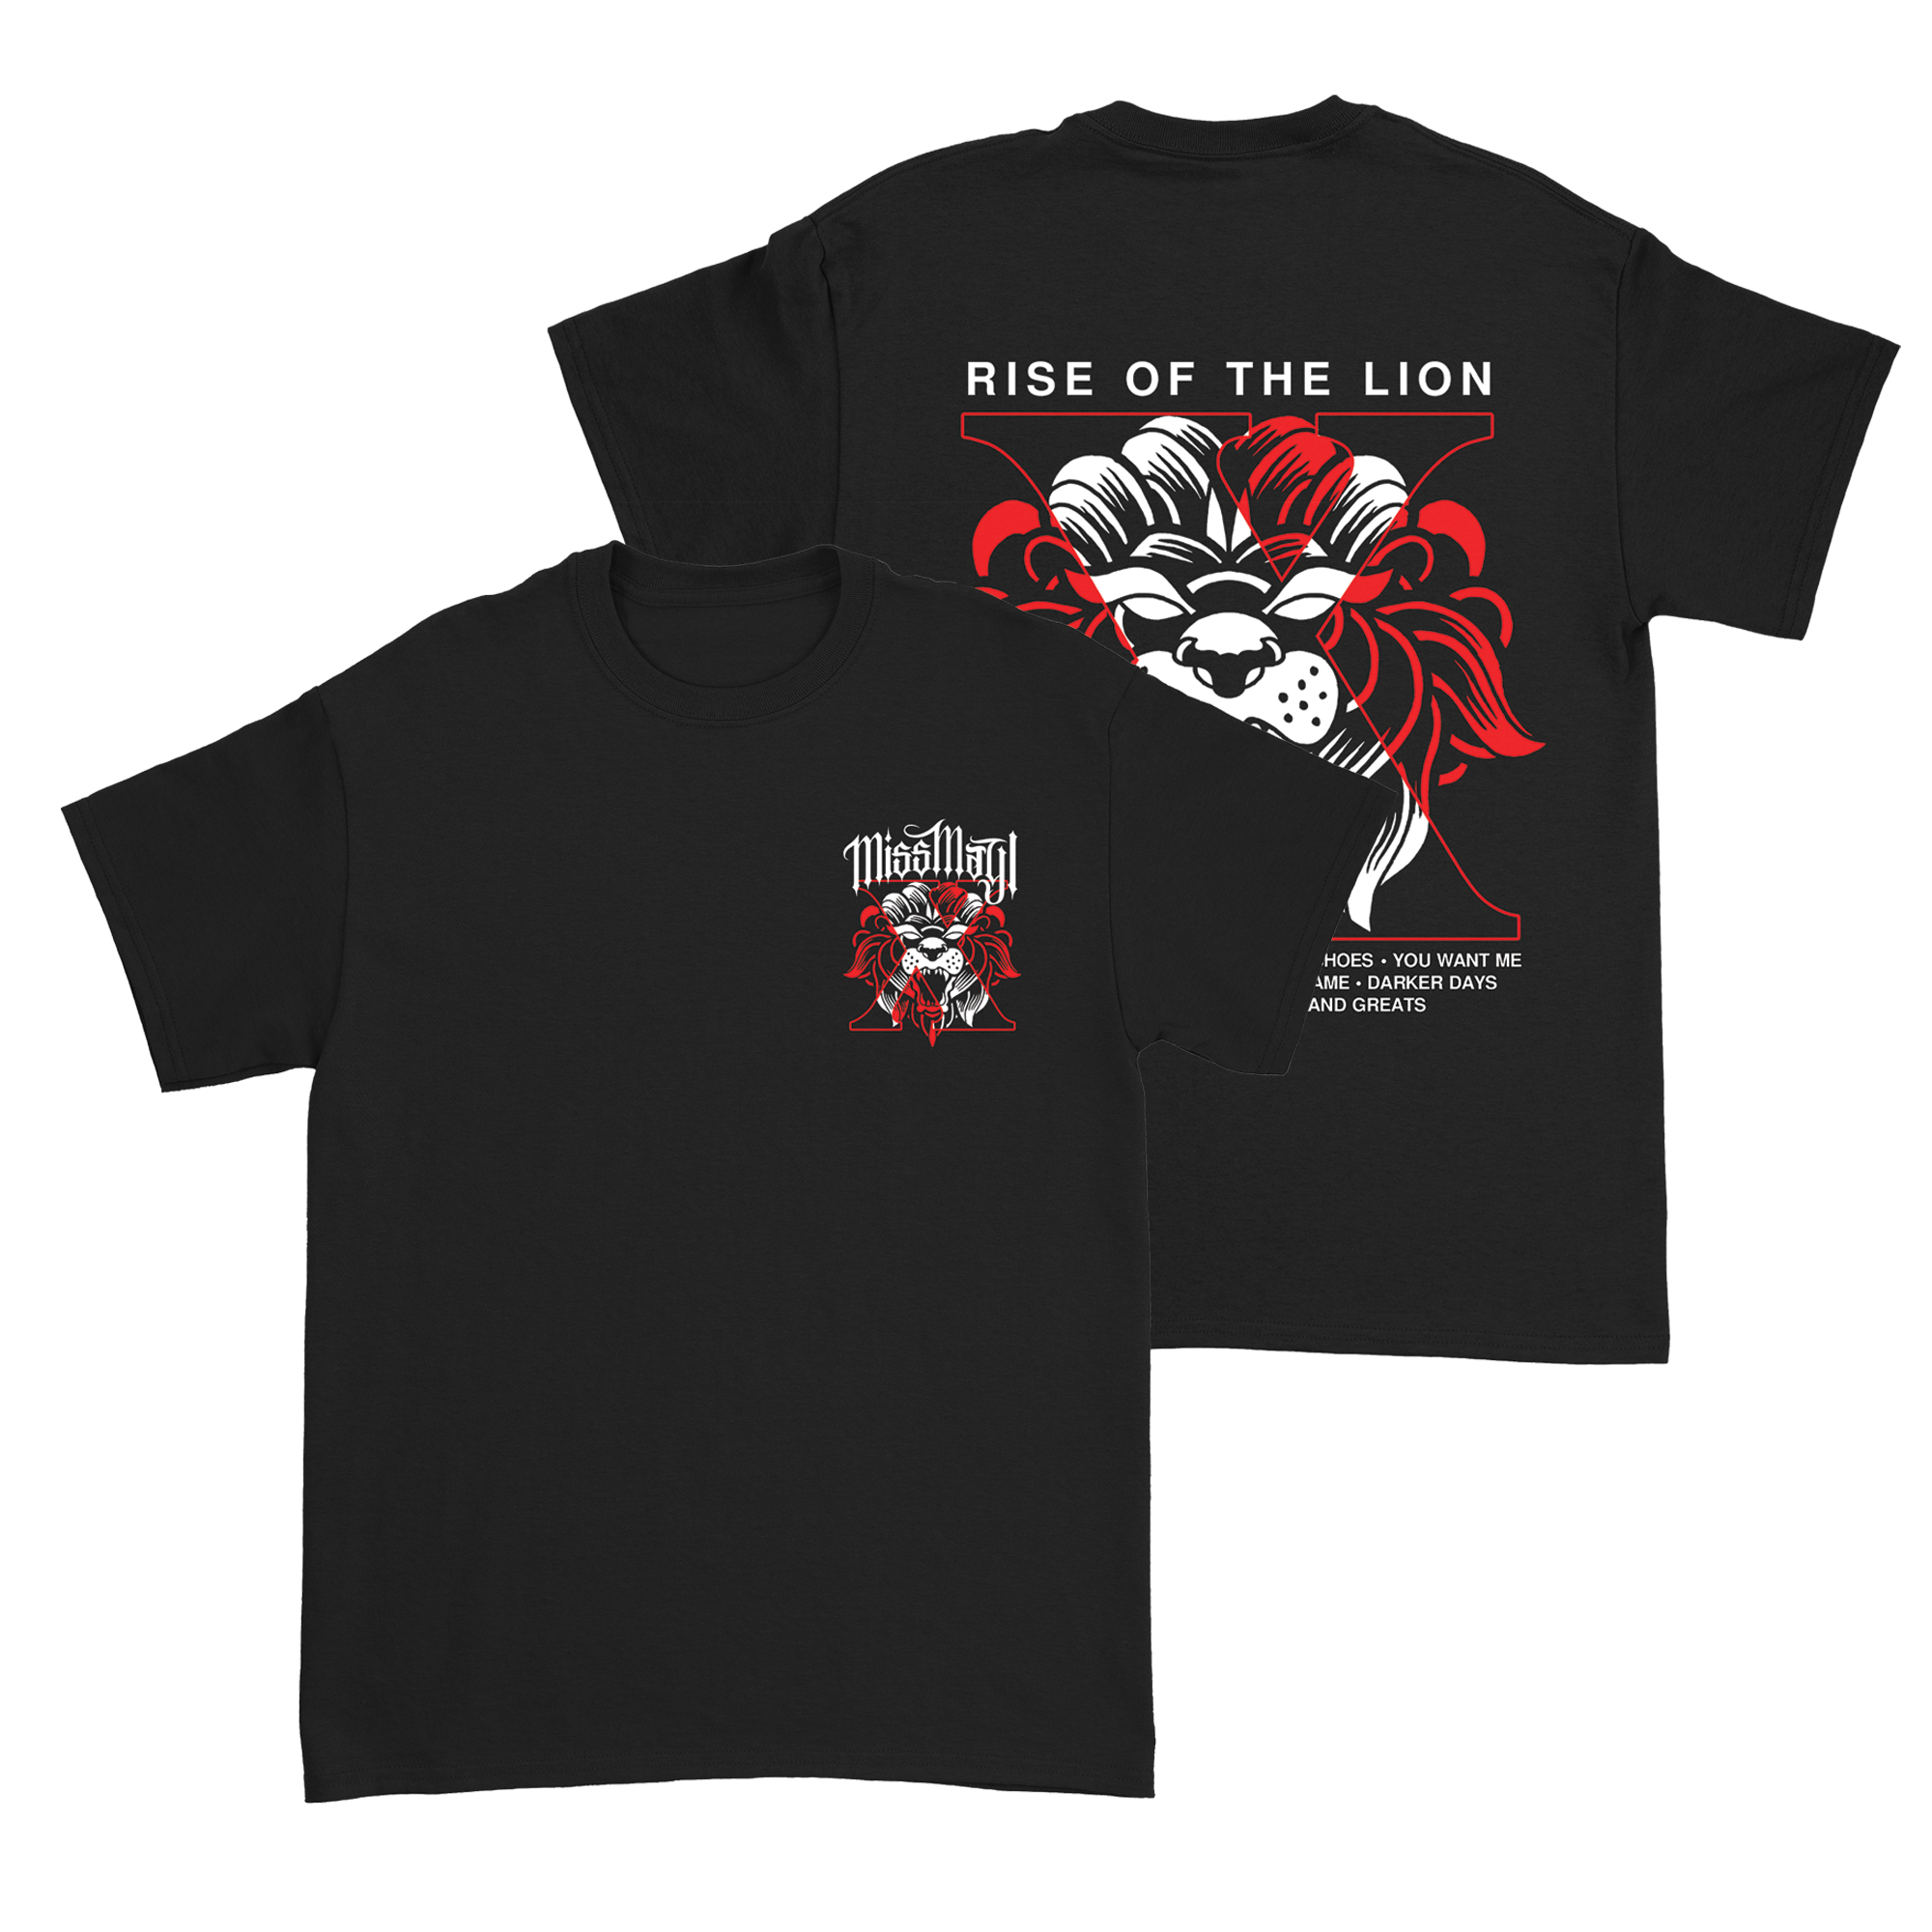 Rise of the Lion T-Shirt